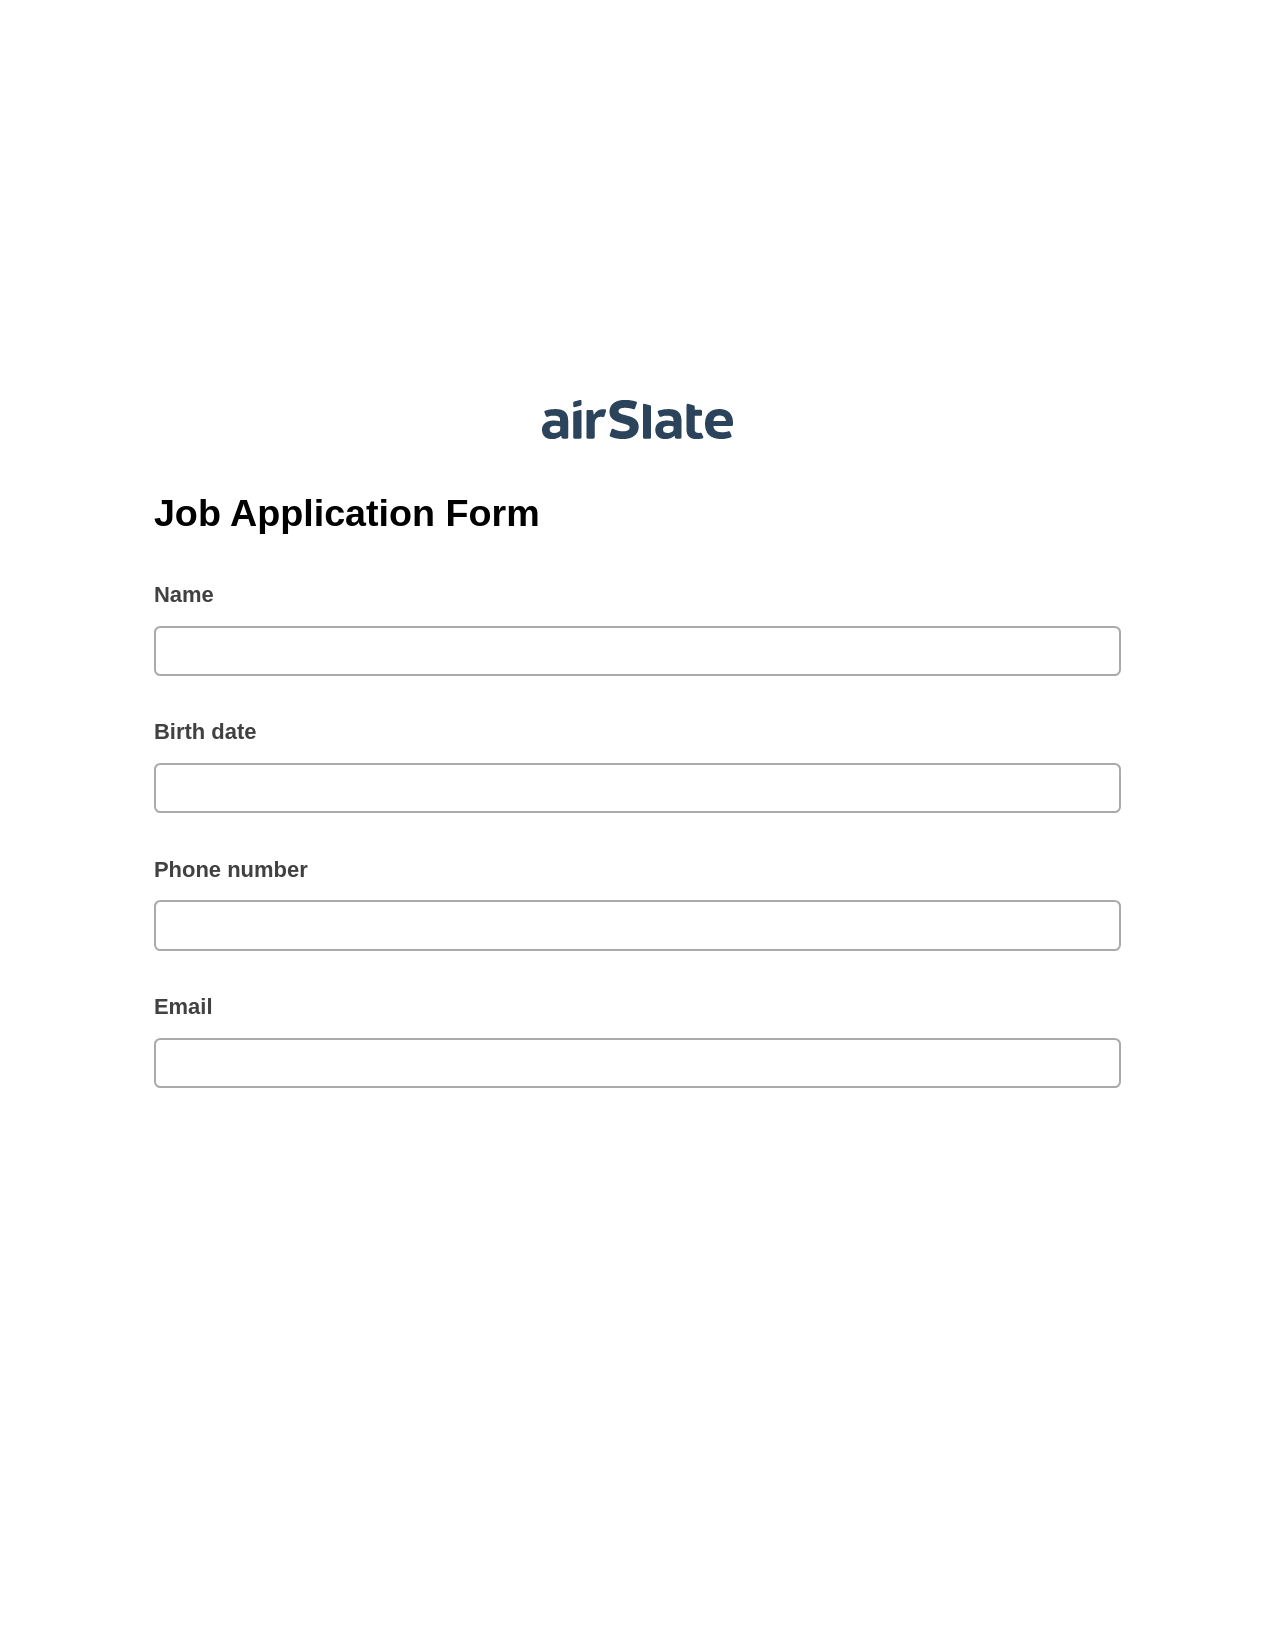 Job Application Form Pre-fill Dropdown from Airtable, Roles Reminder Bot, Slack Two-Way Binding Bot